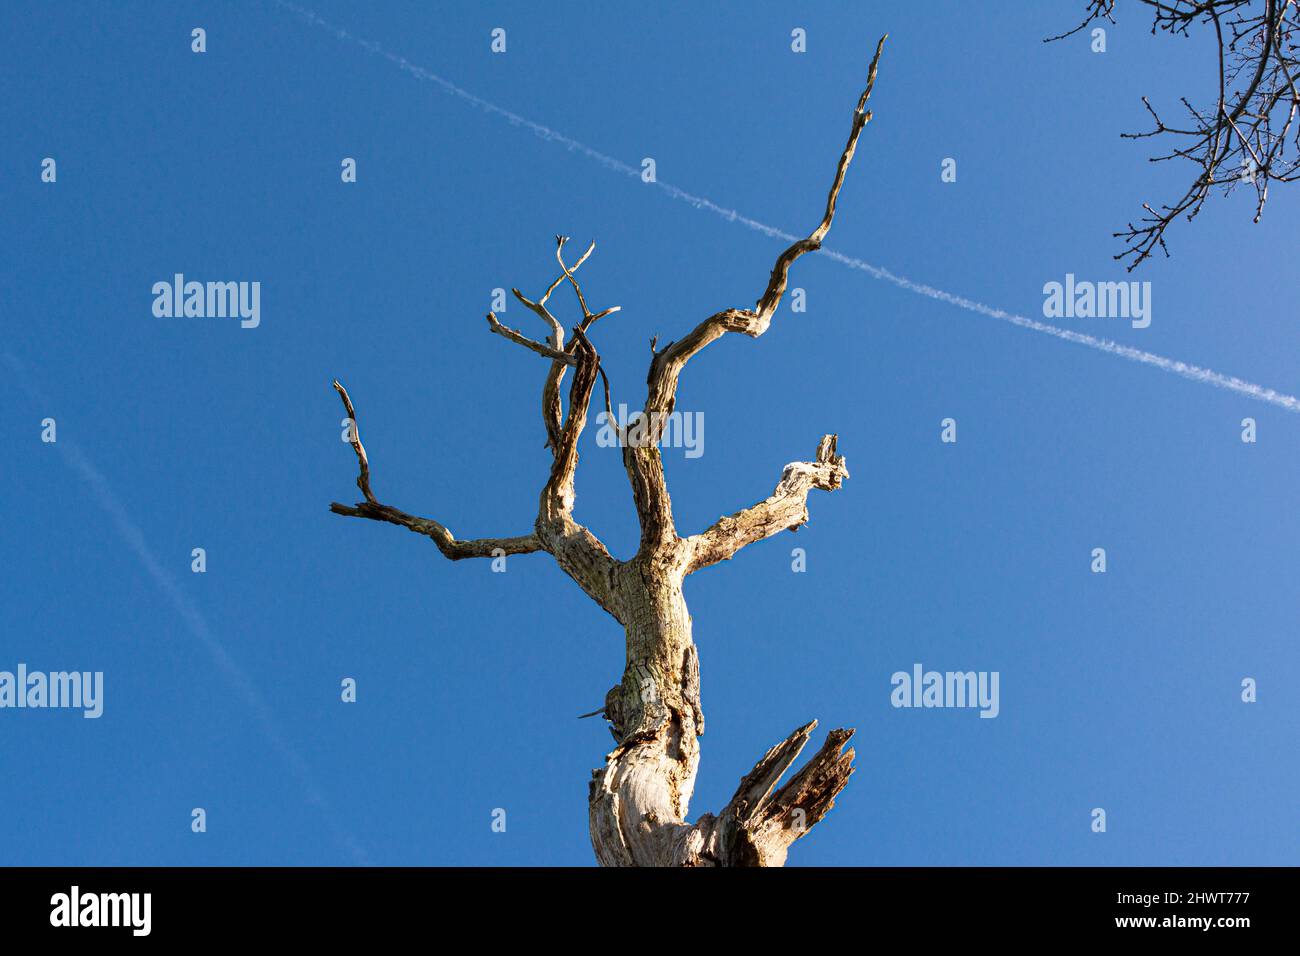 The branches of a dead tree stretching up to a blue sky Stock Photo